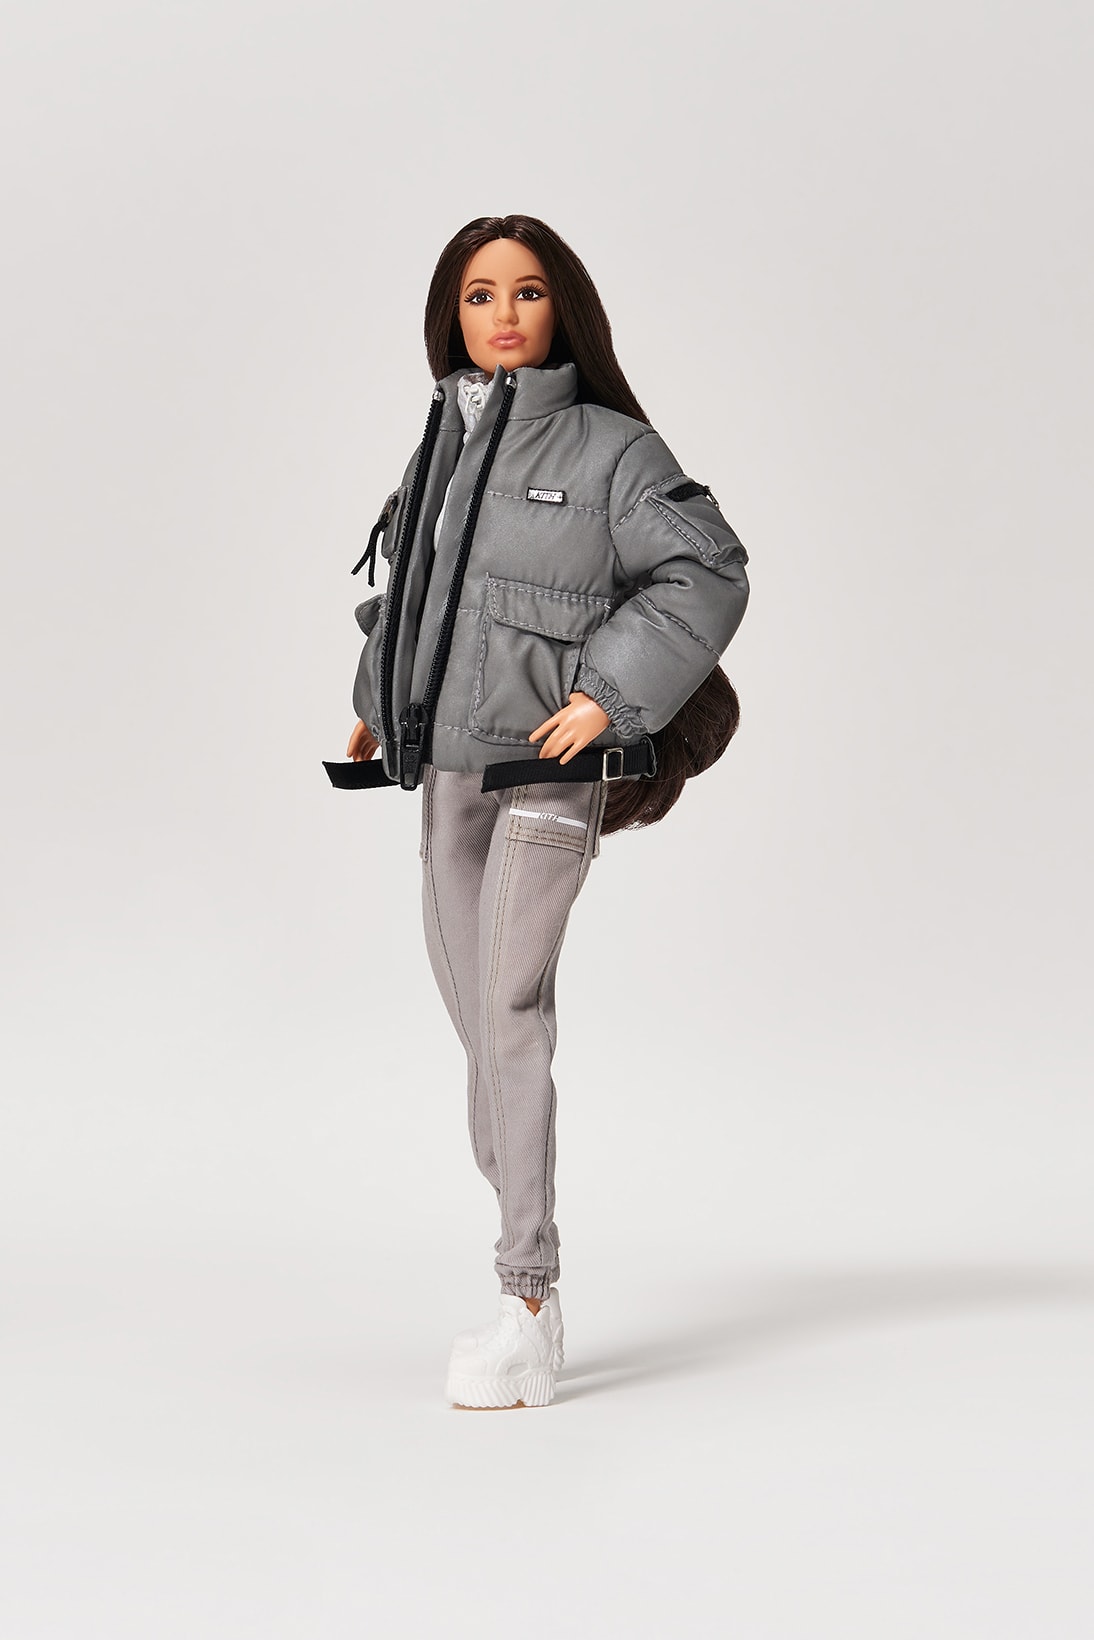 kith women barbie collaboration new york flagship contest doll toy exhibition soho